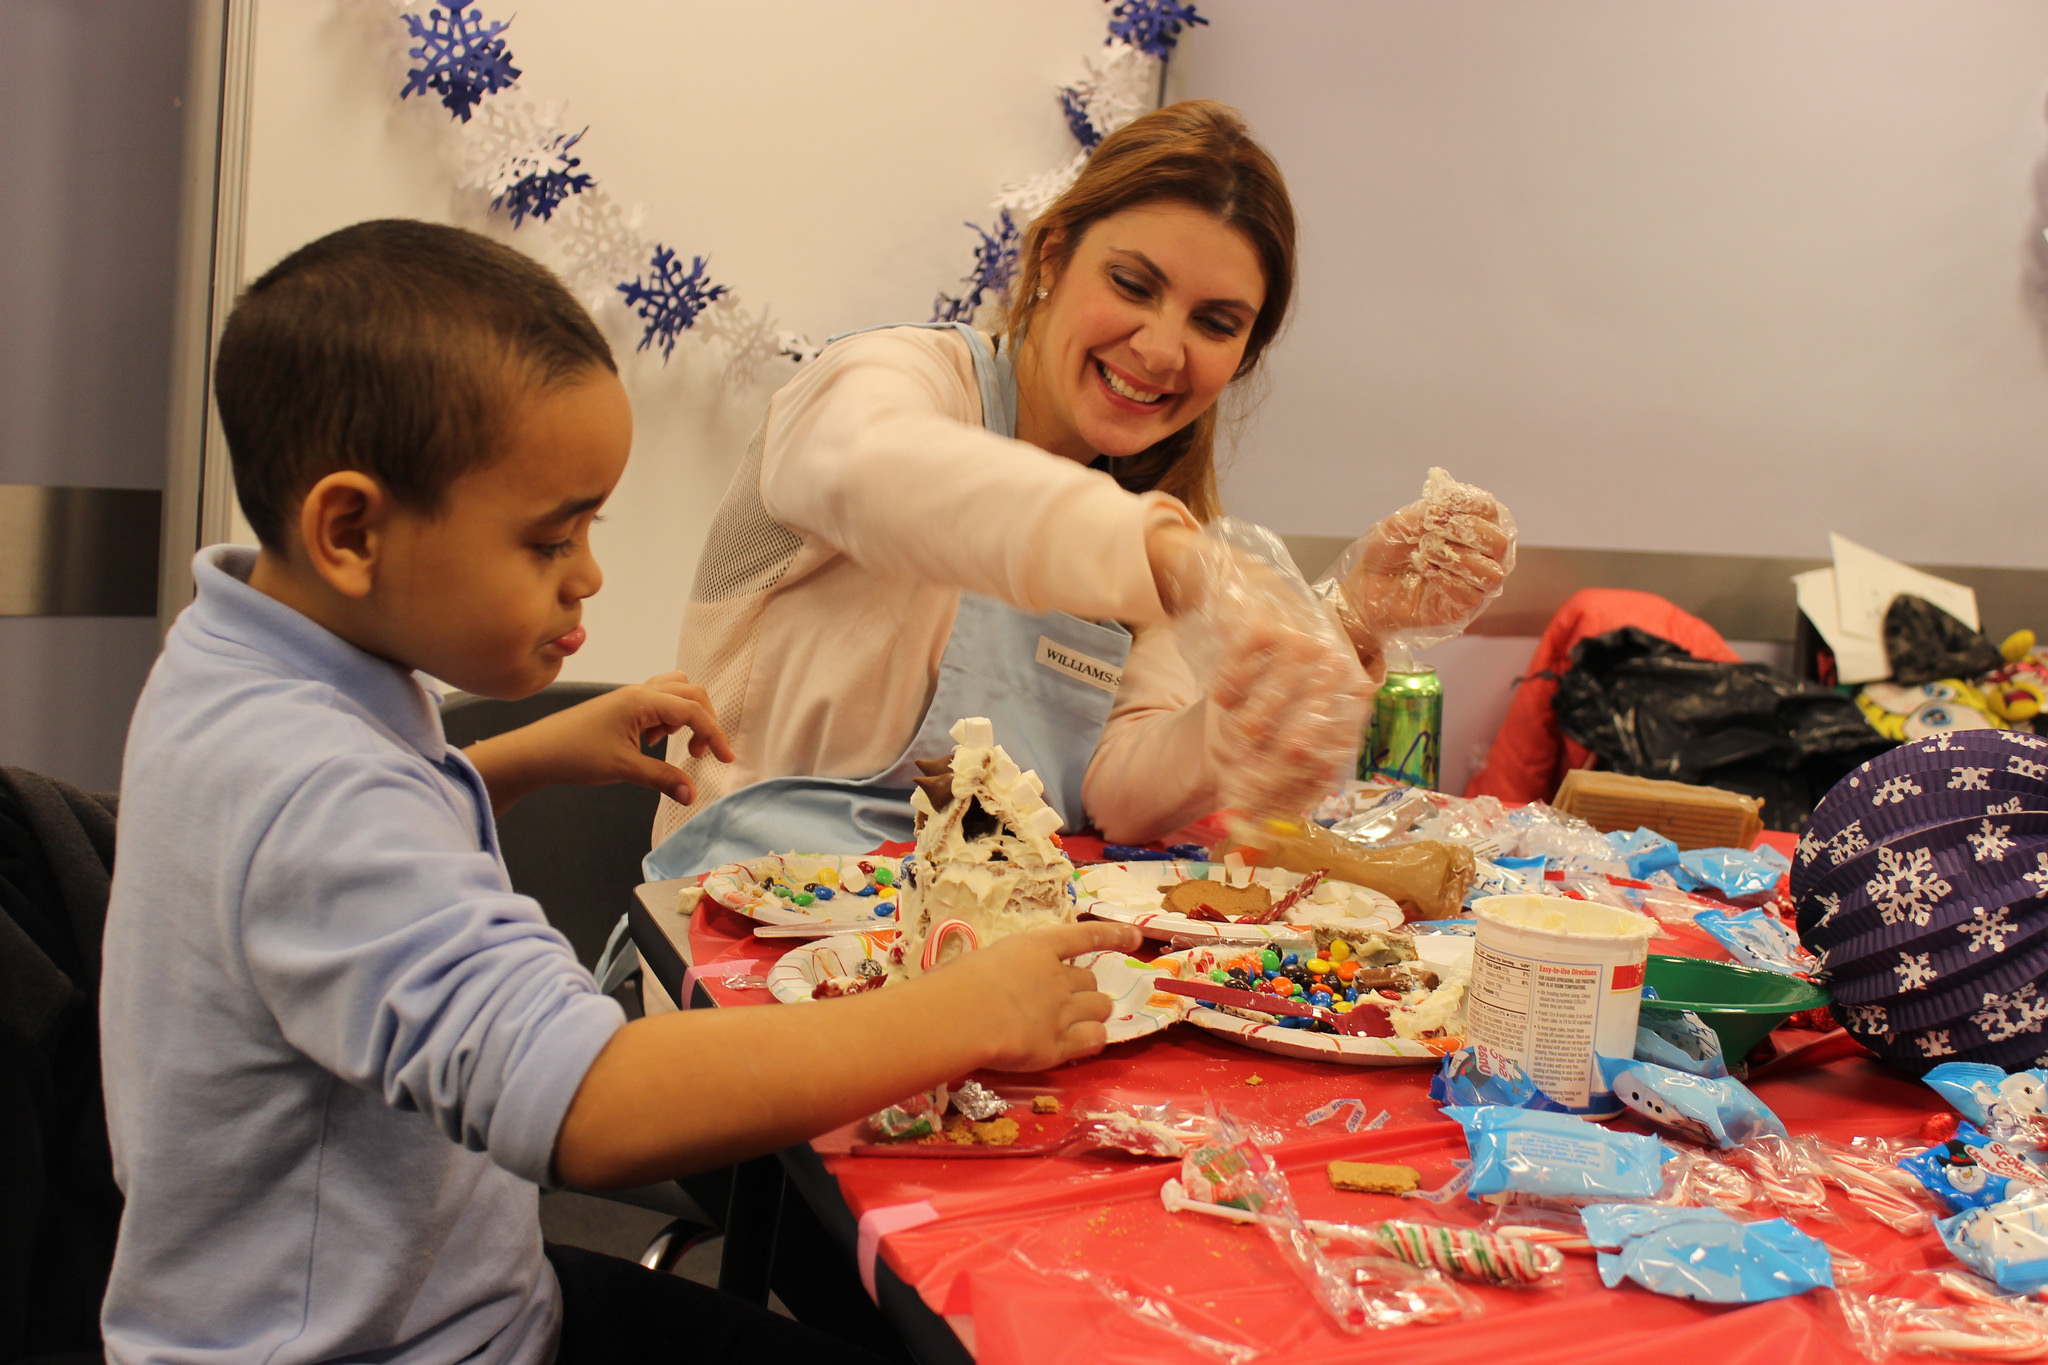 Volunteer makes gingerbread house with child